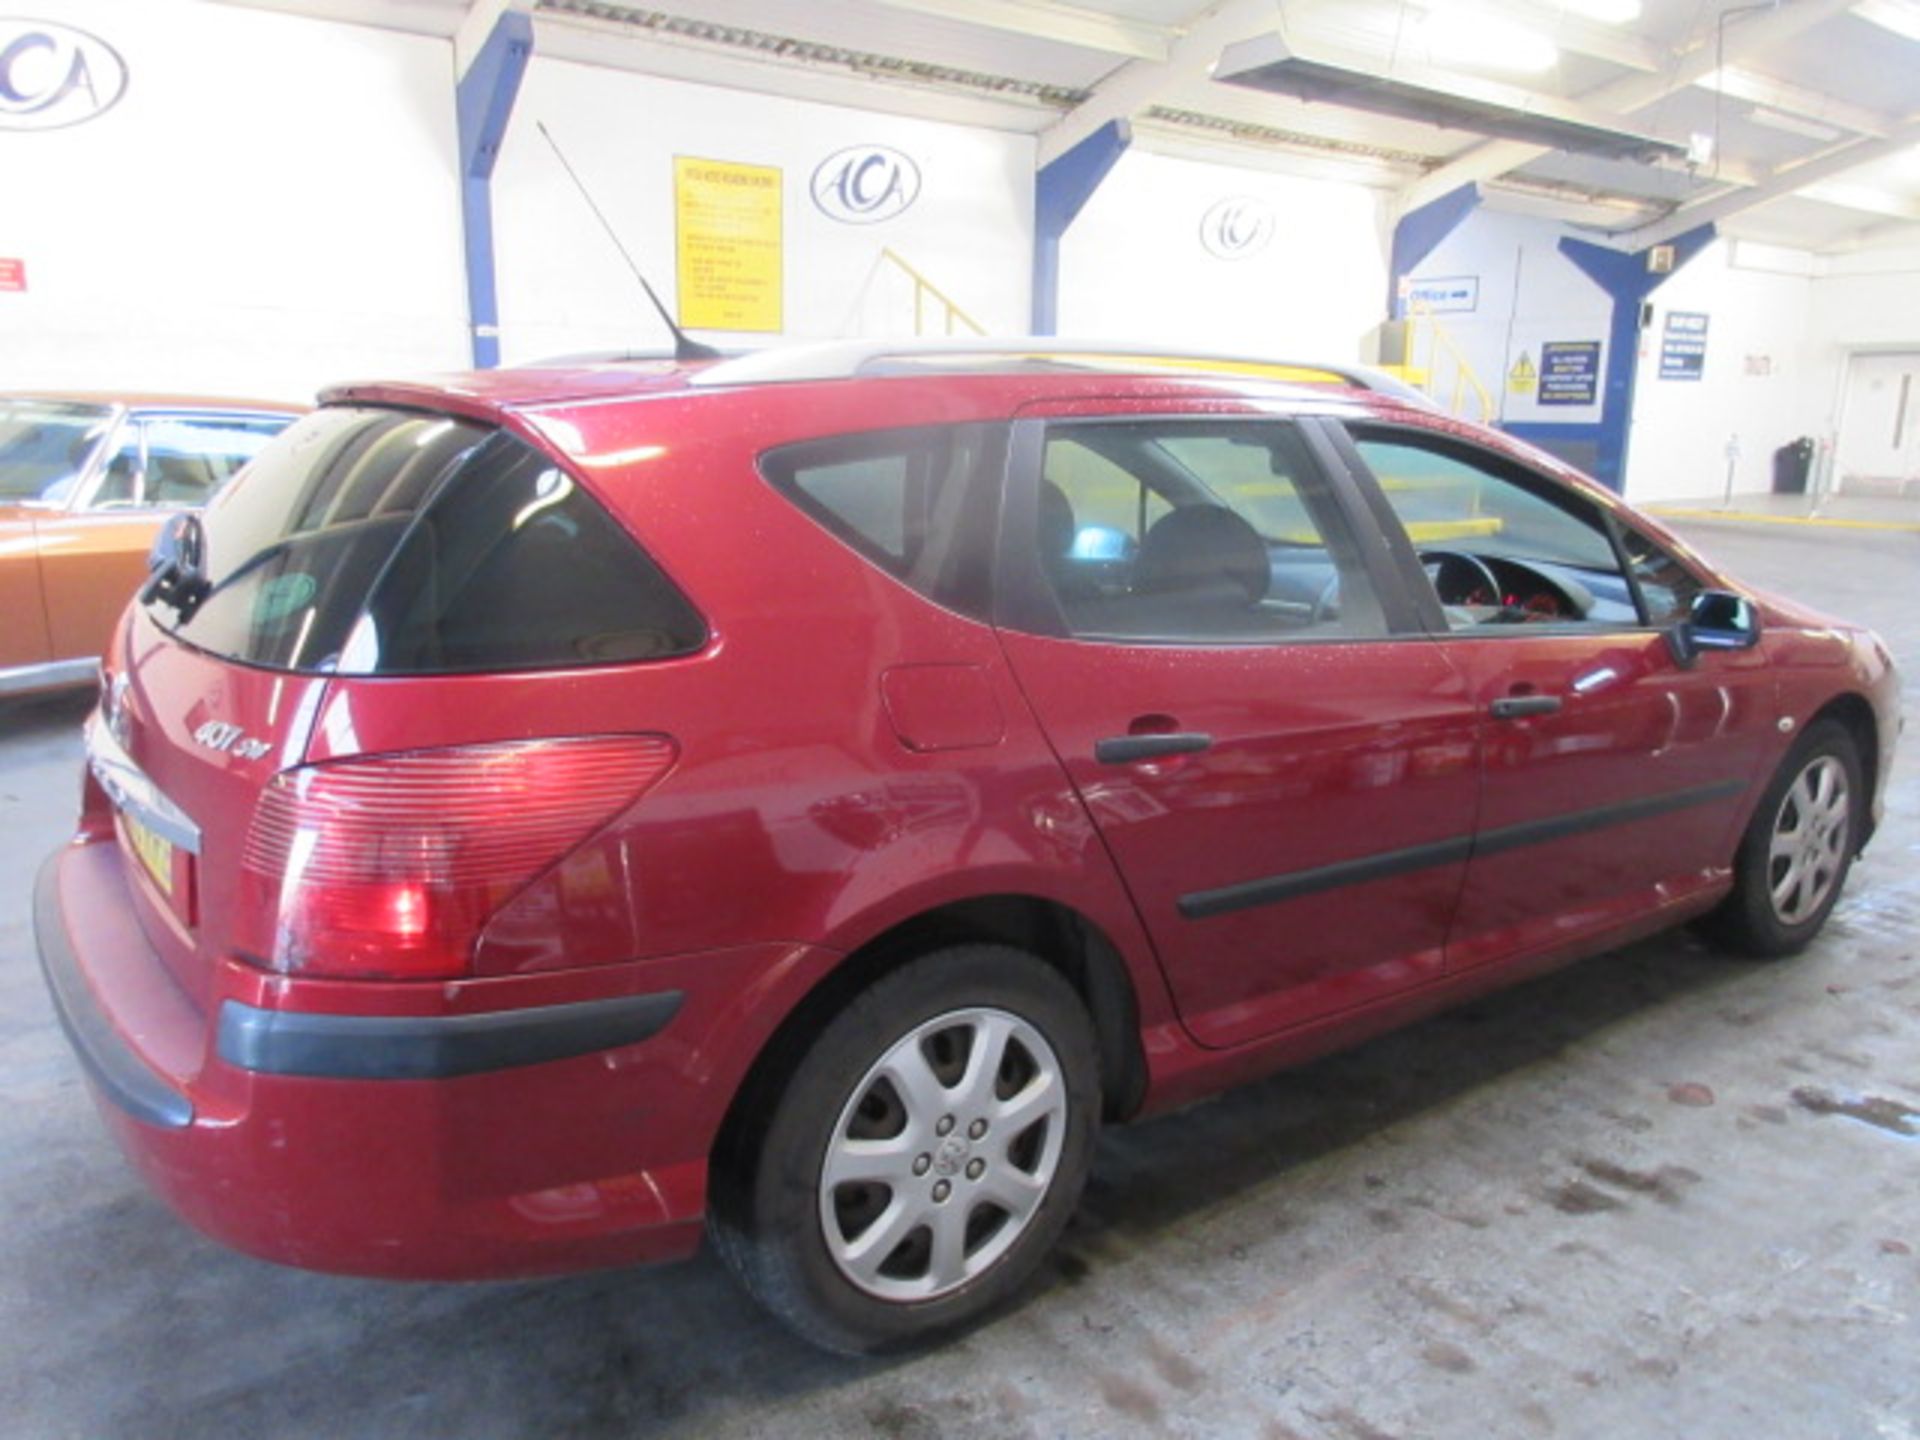 56 06 Peugeot 407 SW S HDI - Image 3 of 15